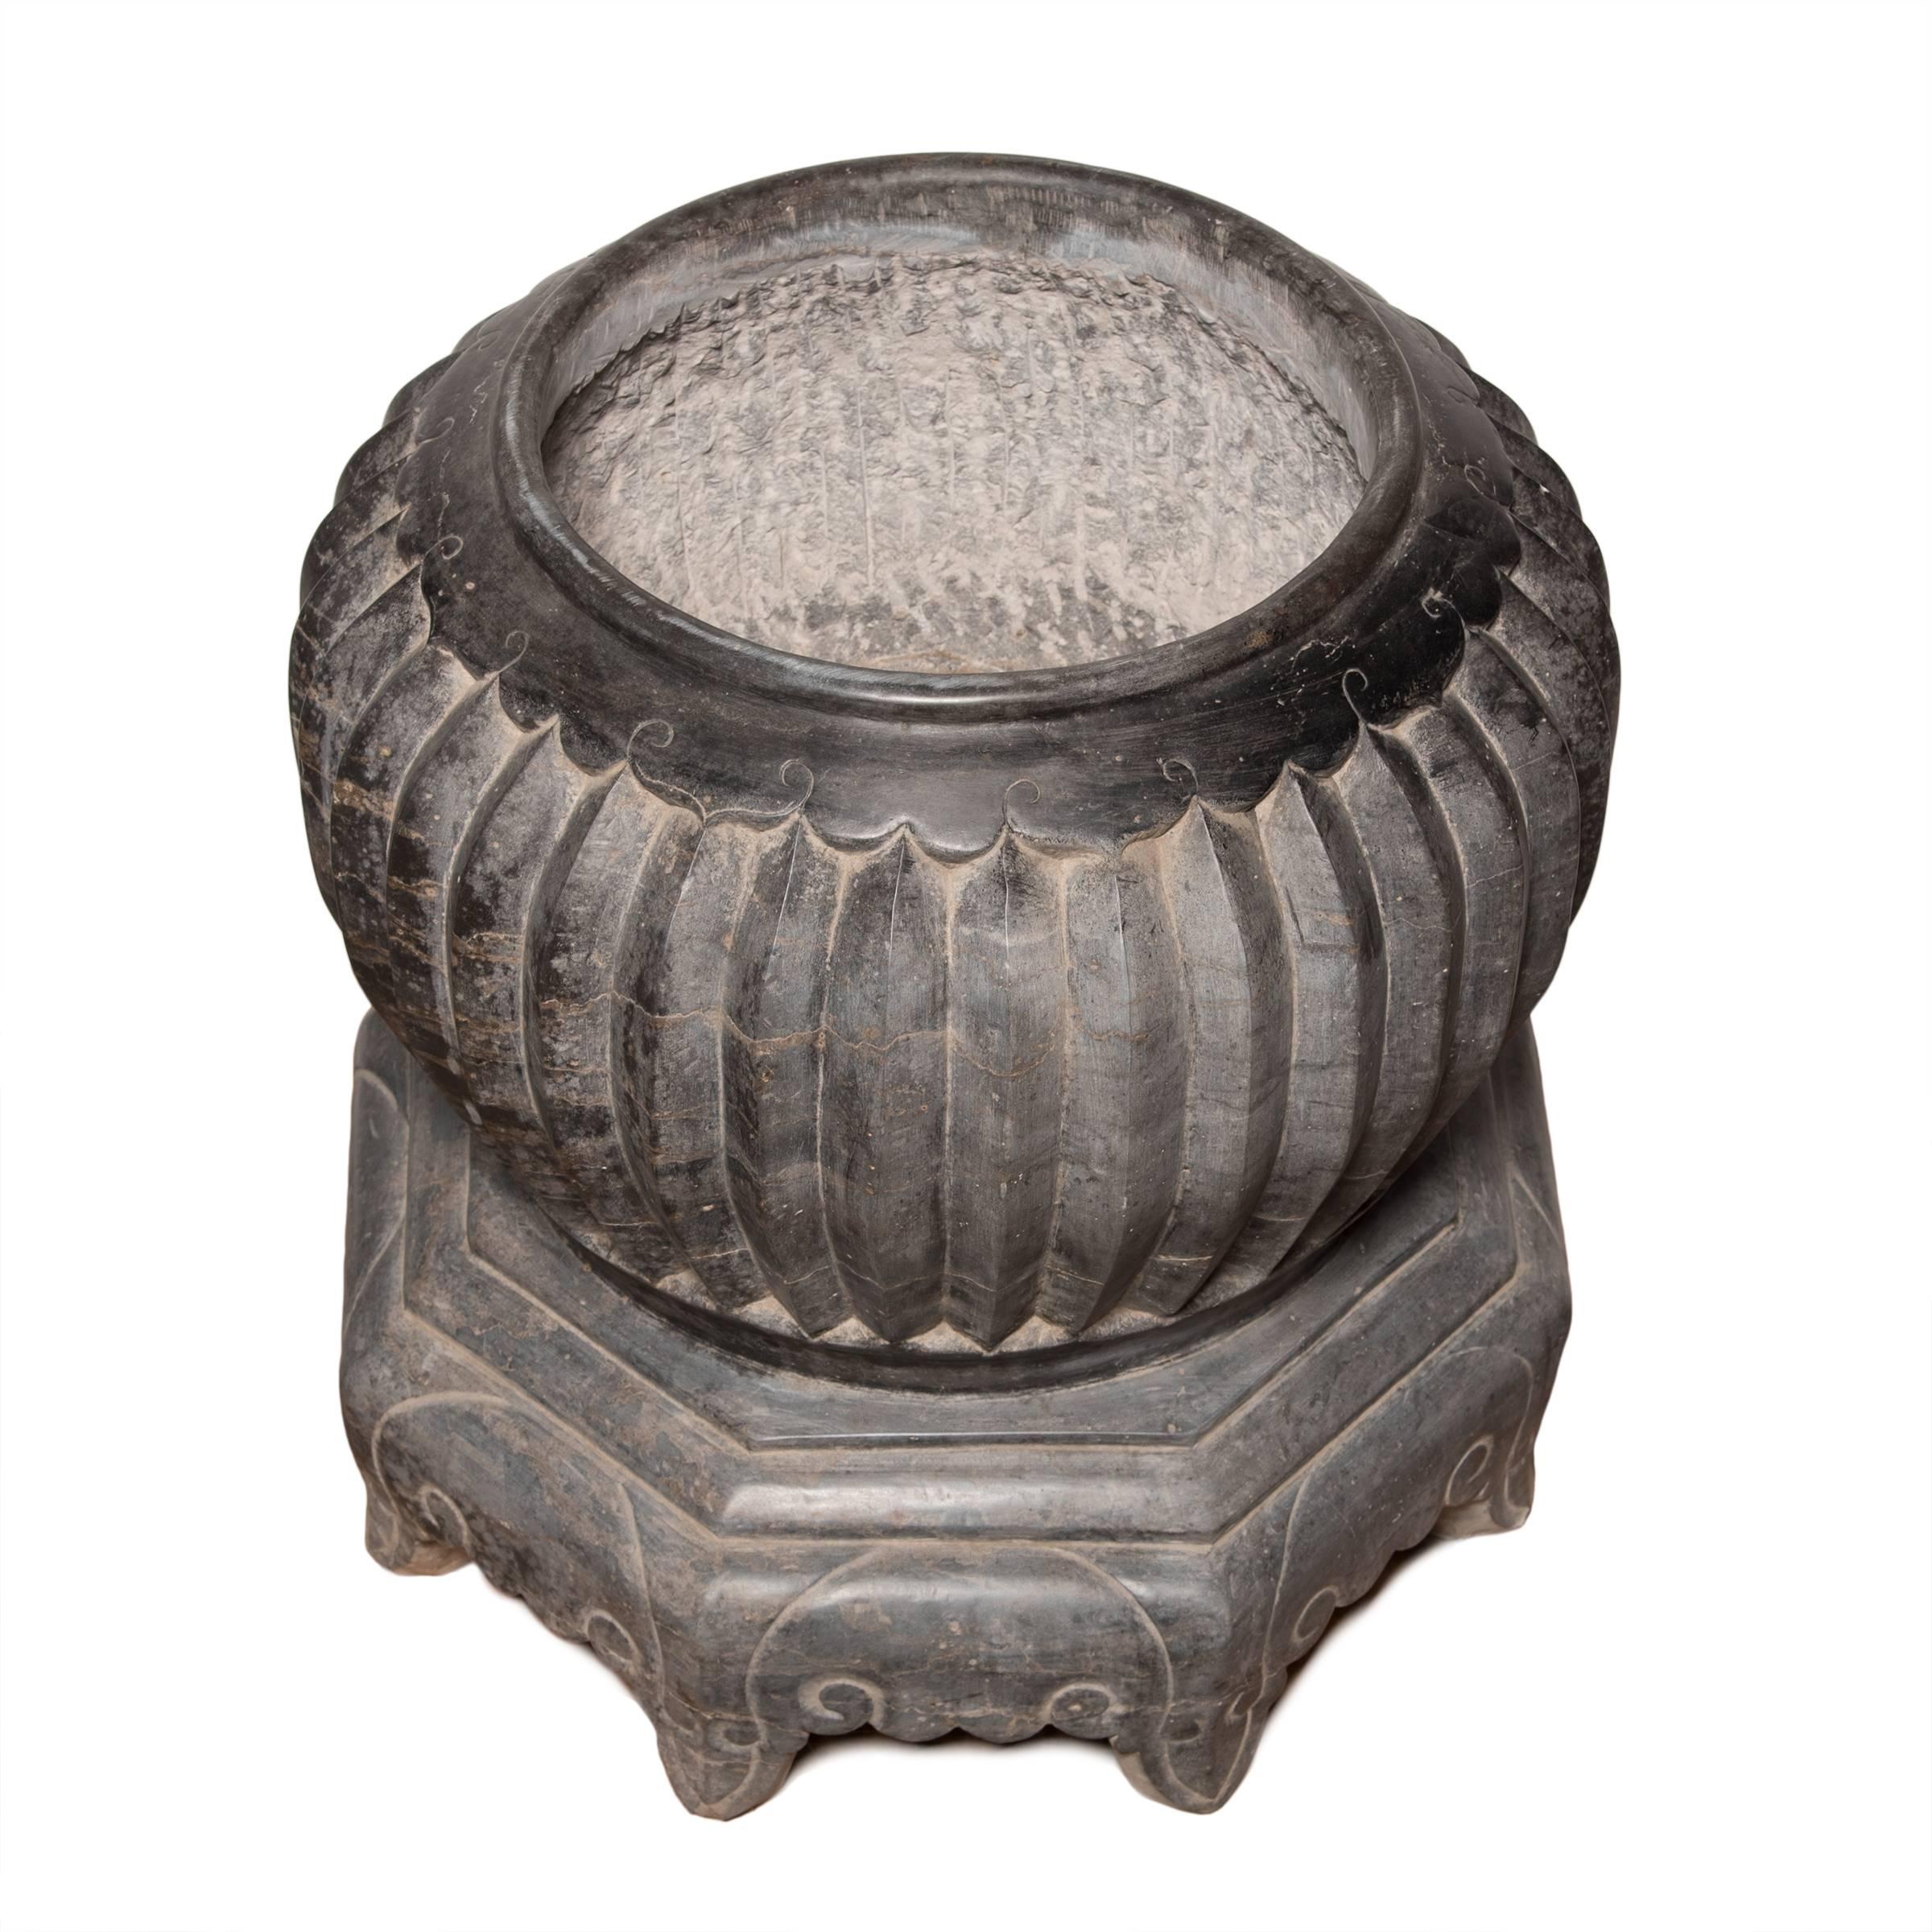 Contemporary Chinese Footed Melon Basin Planter